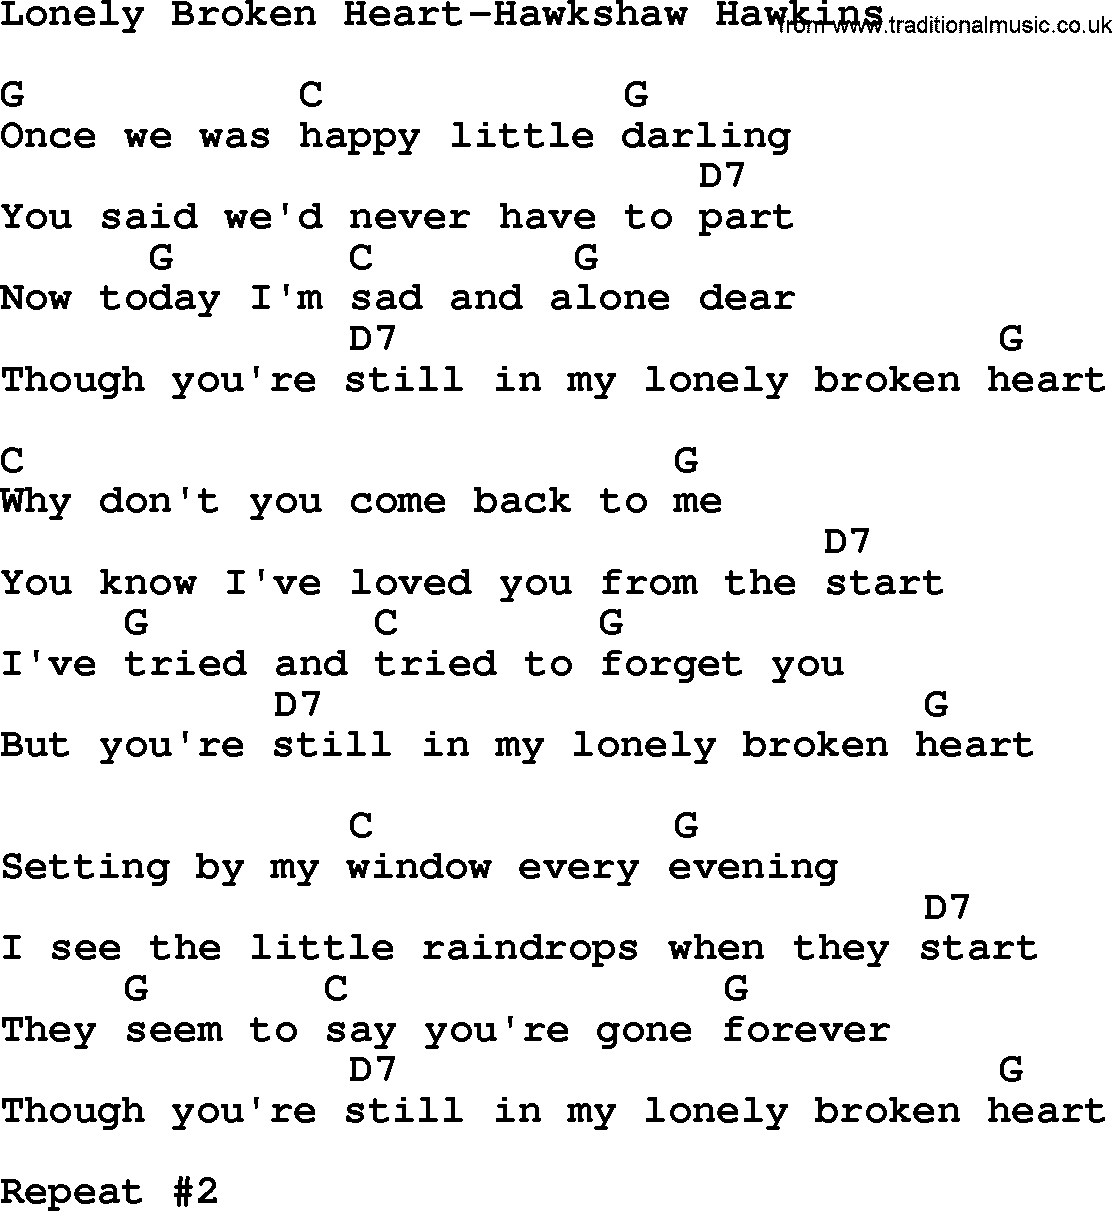 Country music song: Lonely Broken Heart-Hawkshaw Hawkins lyrics and chords